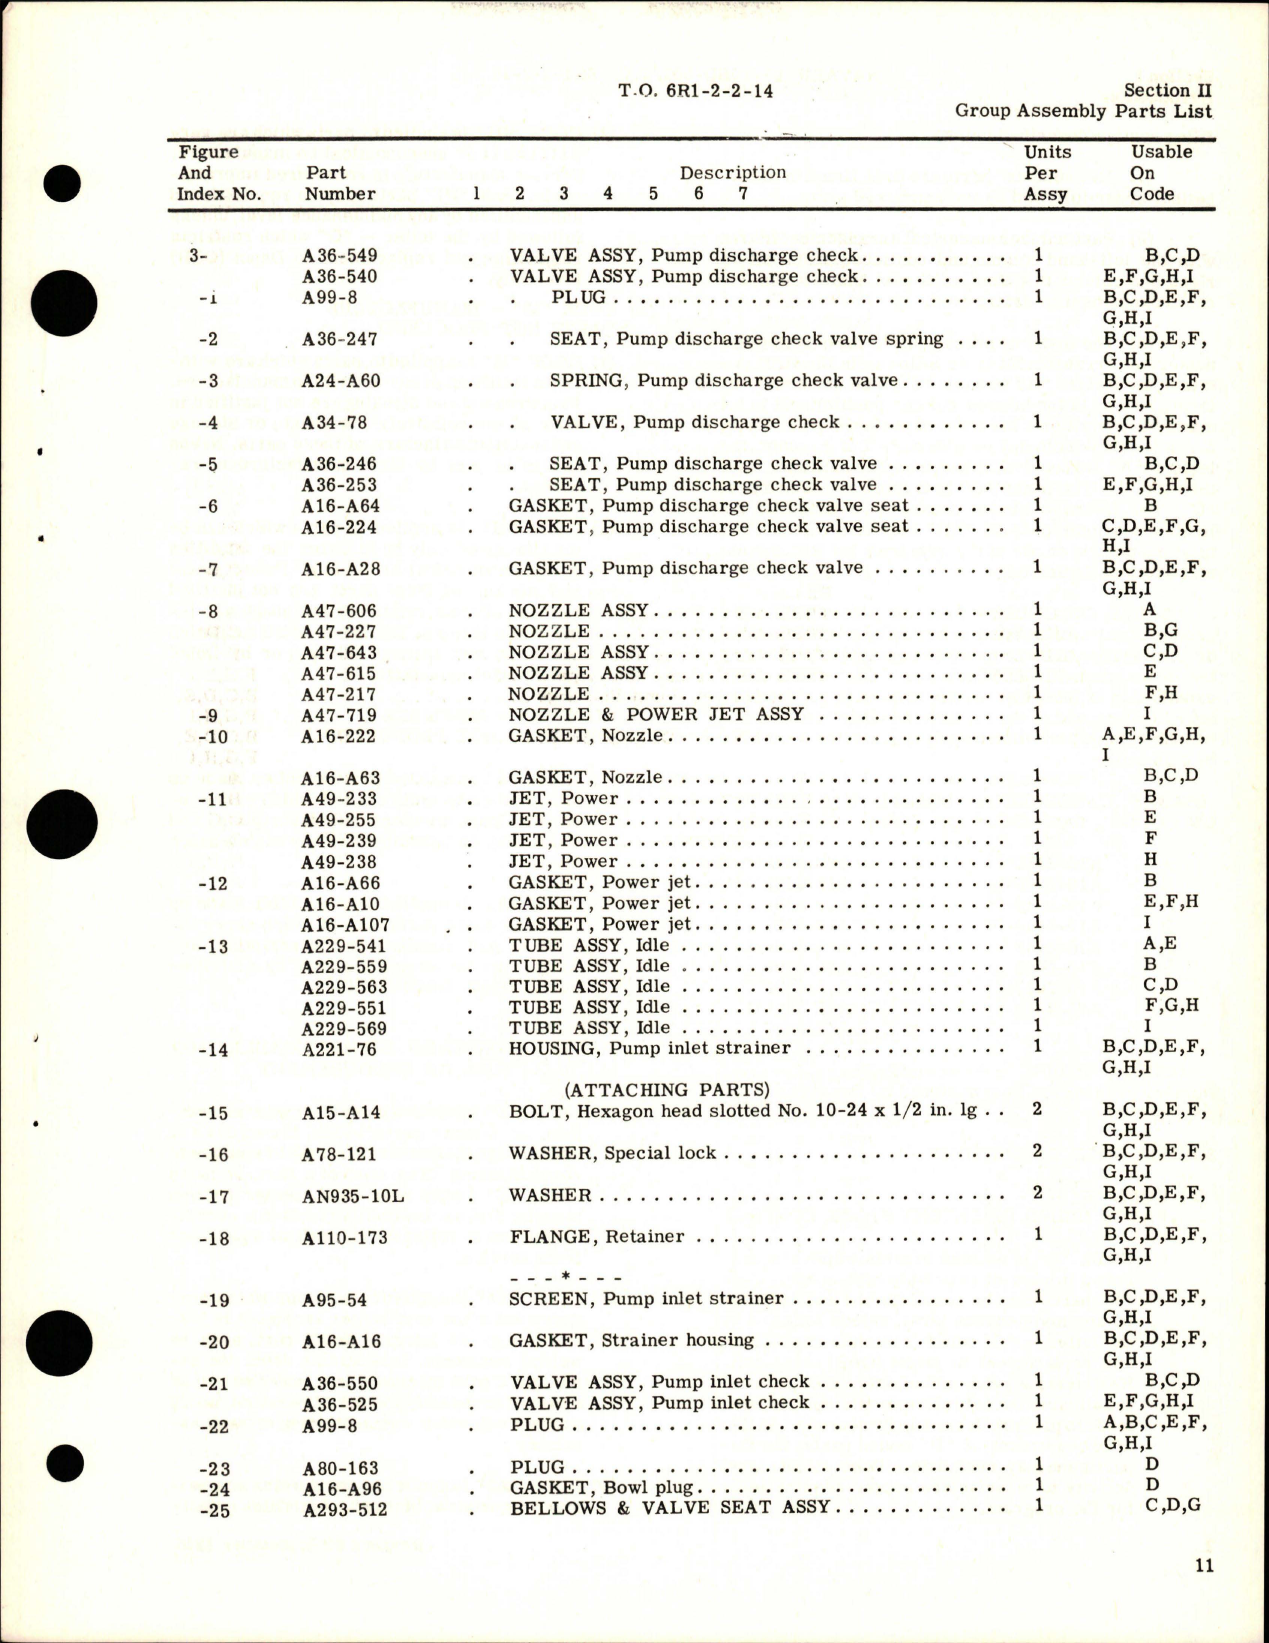 Sample page 5 from AirCorps Library document: Illustrated Parts Breakdown for Aircraft Carburetor